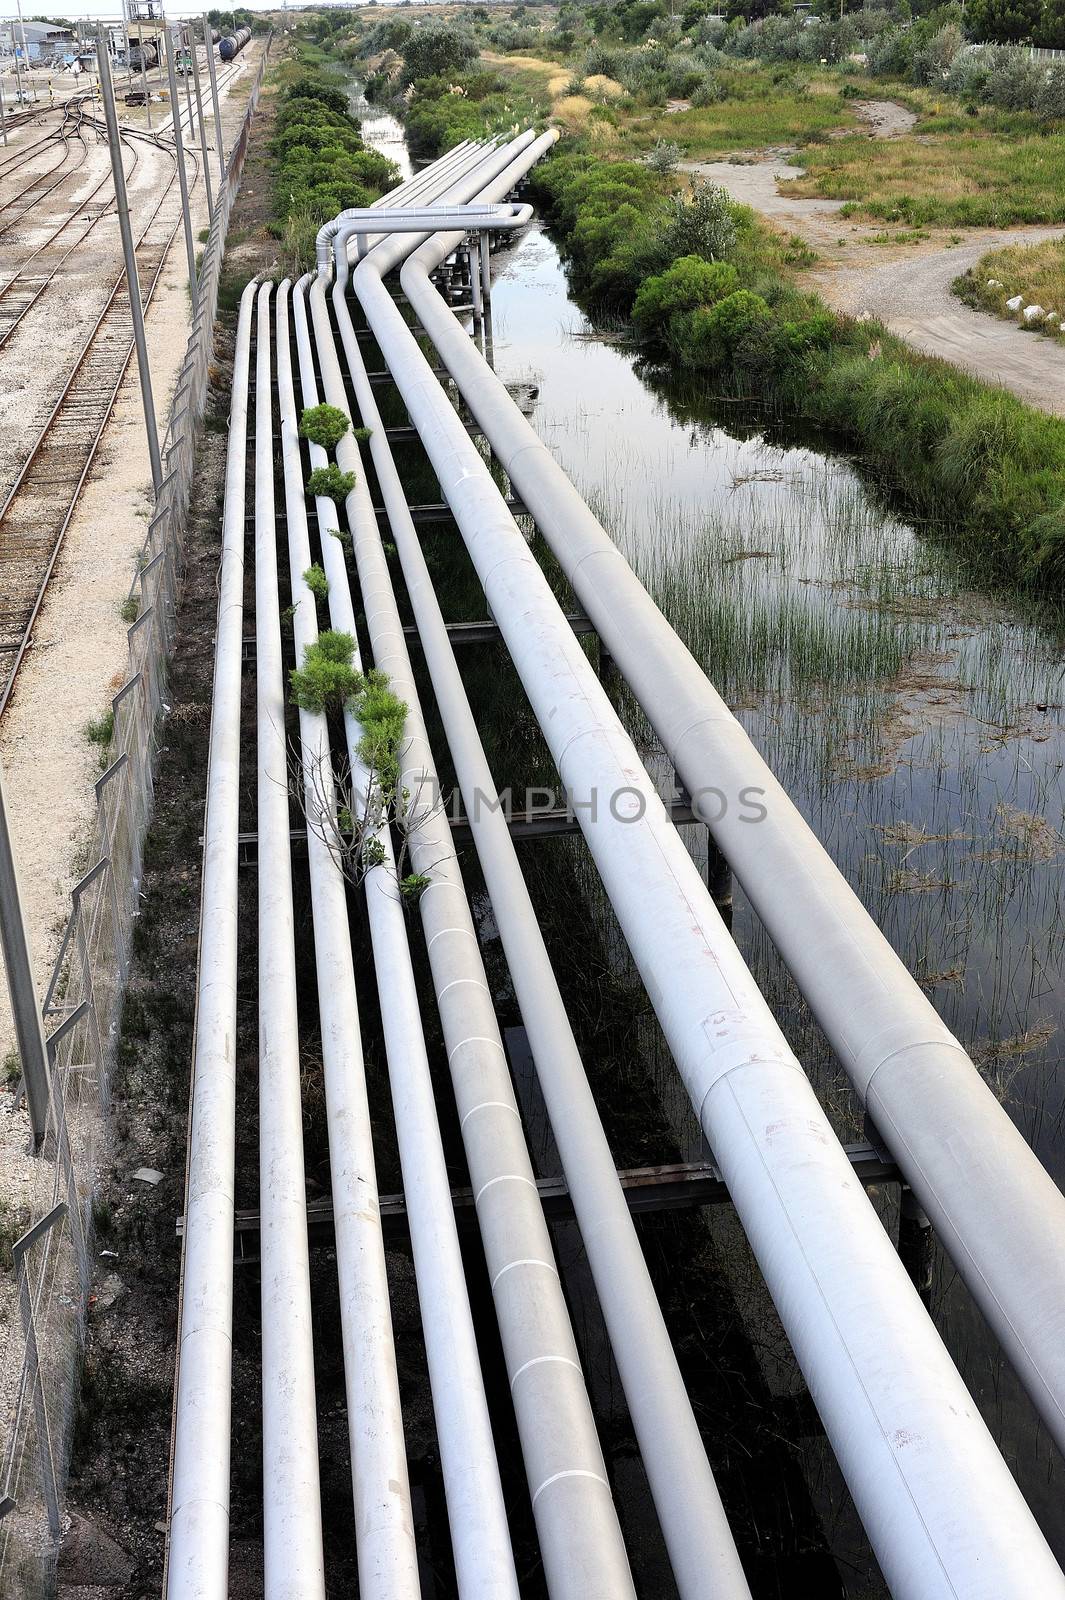 Pipelines by gillespaire